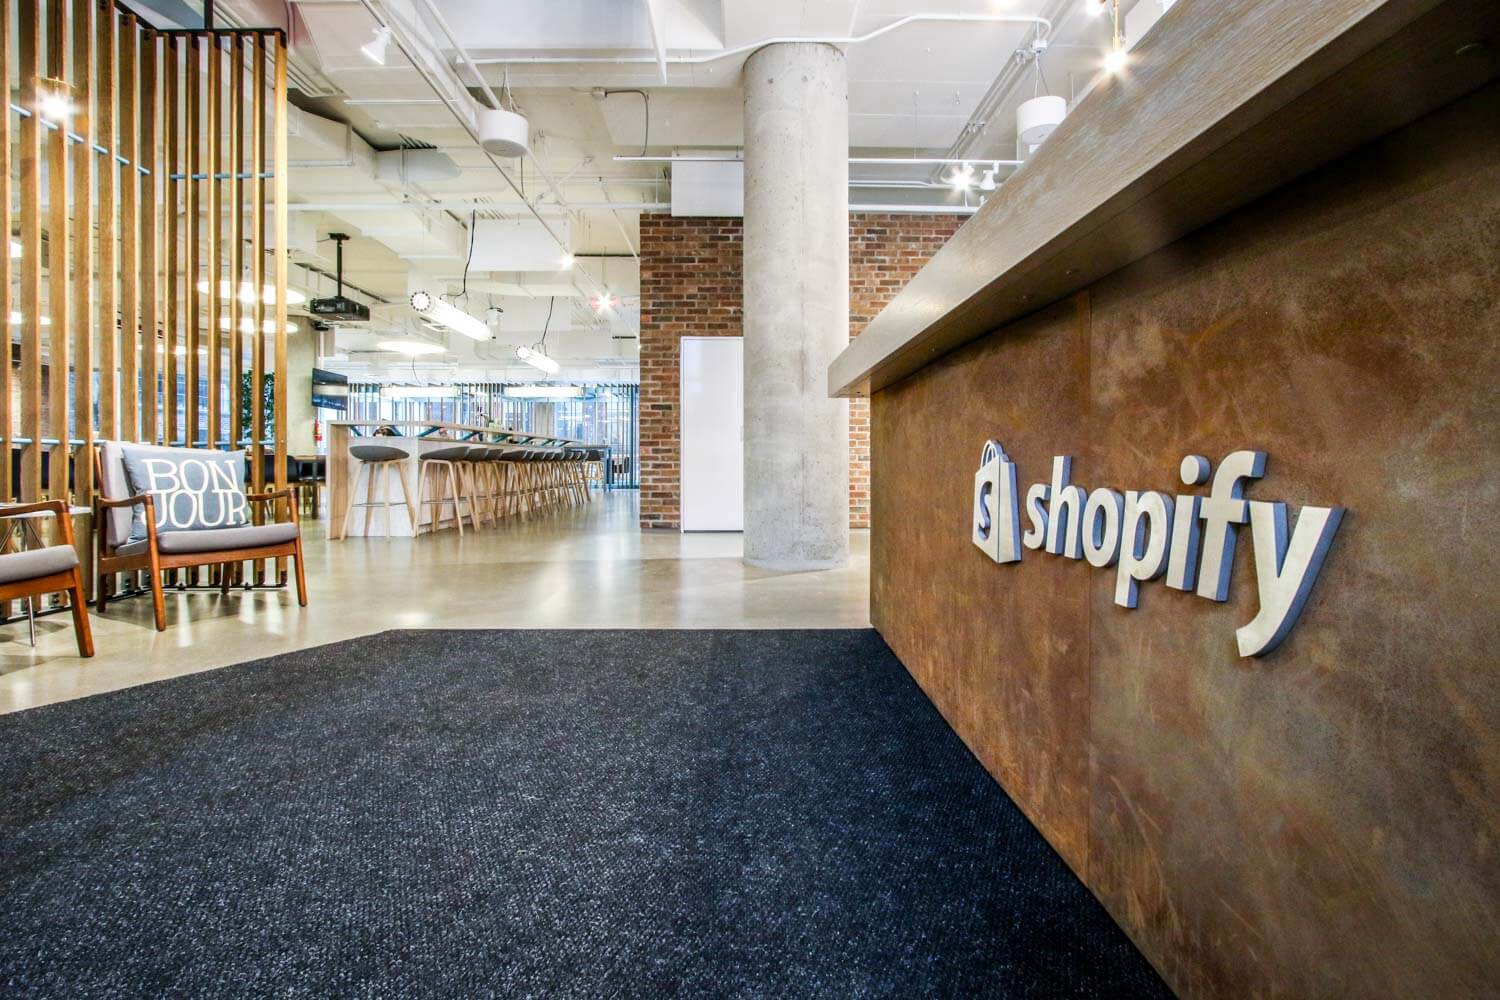 Shopify Headquarter in Vancouver